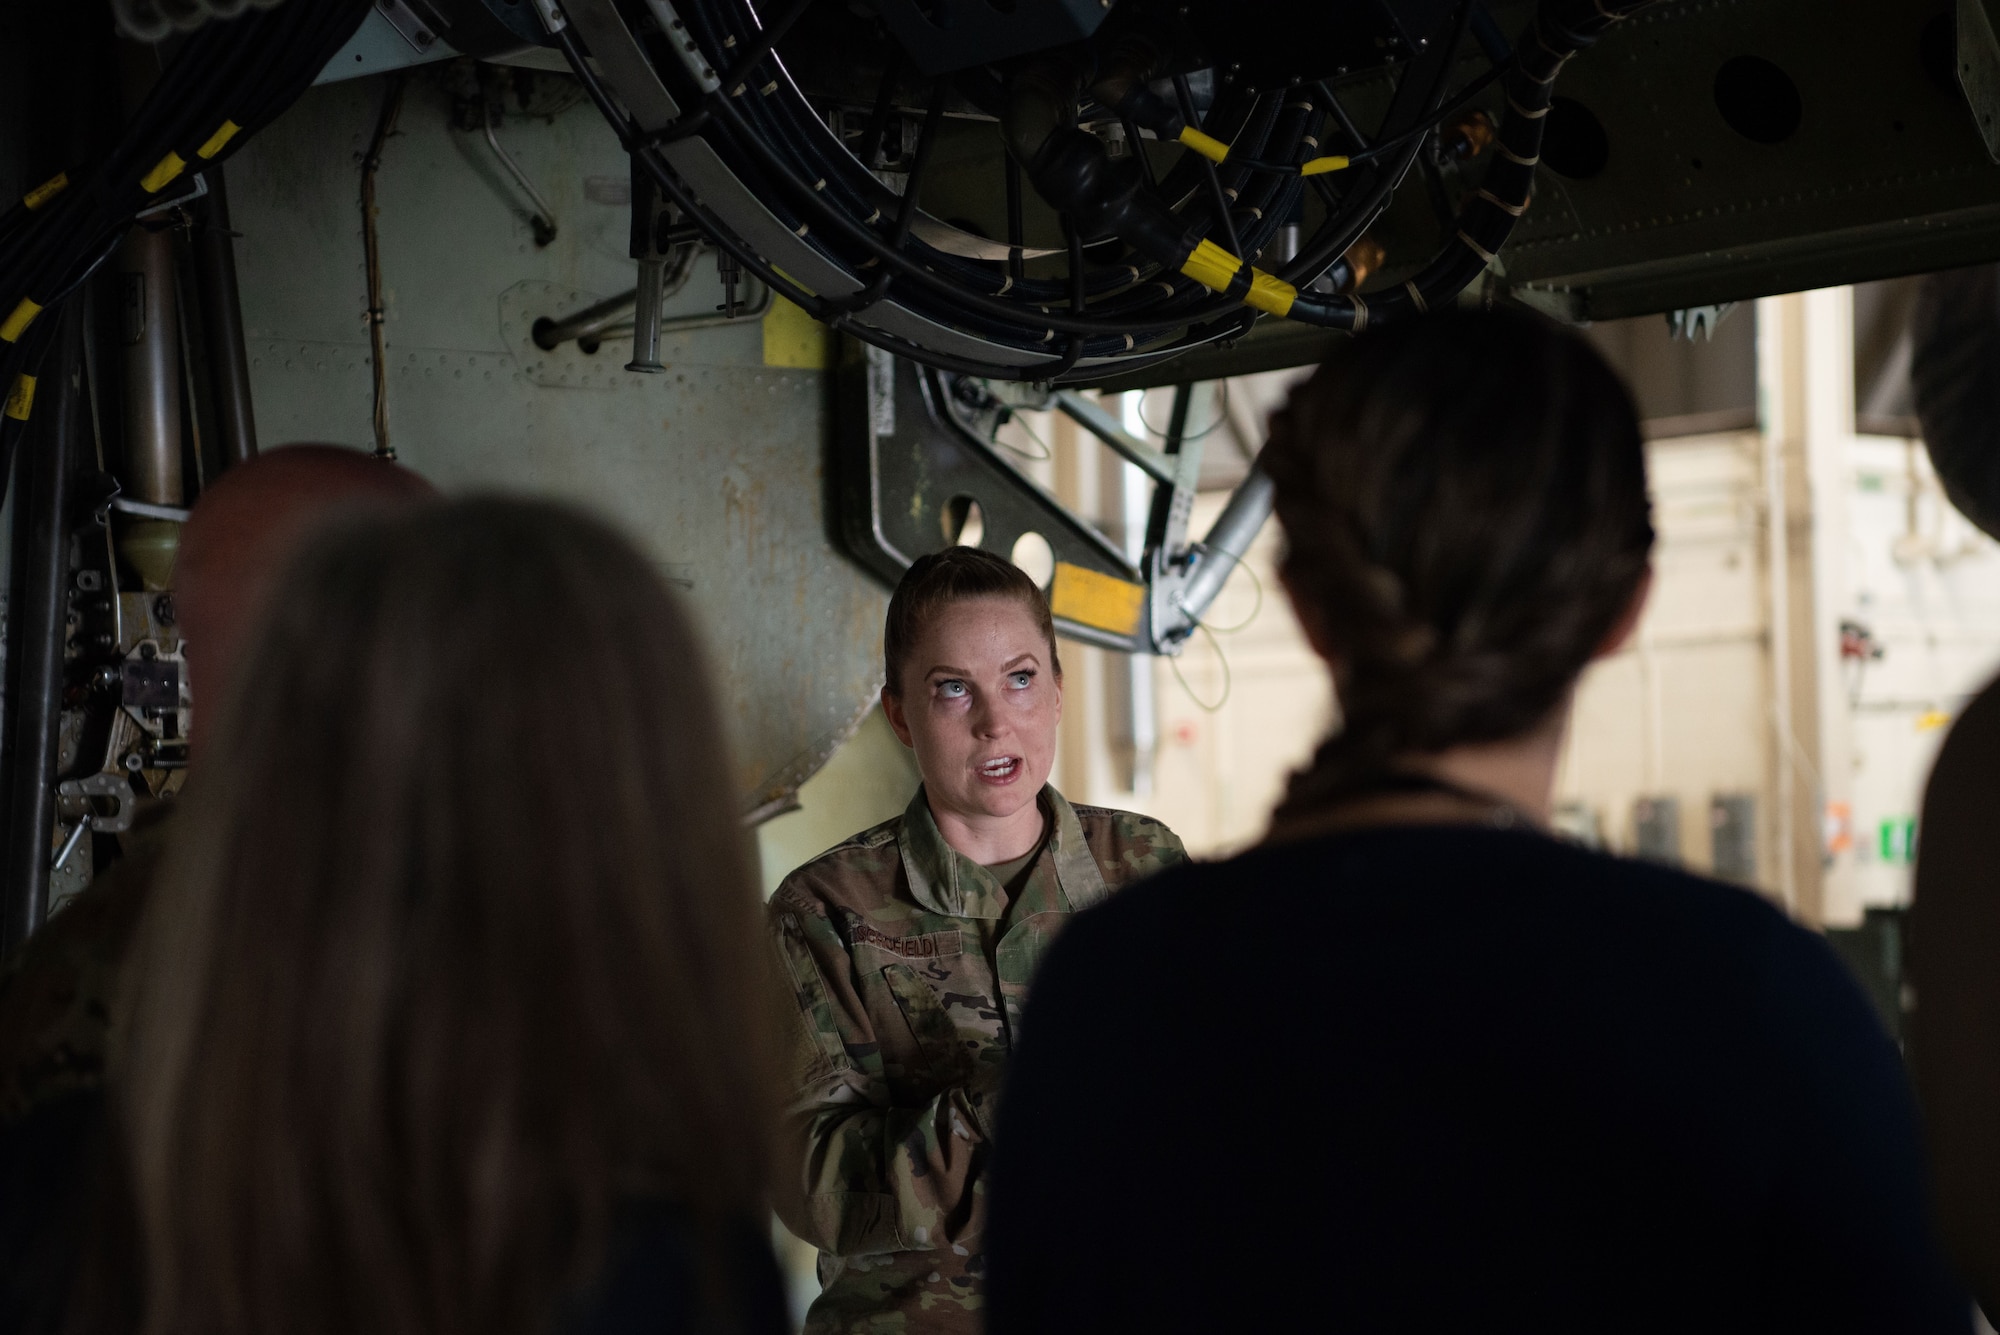 U.S Air Force Master Sgt. Shelley Schofield, 5th Maintenance Group weapon standardization superintendent, gives a tour of a B52-H Stratofortress to the Defense Logistics Agency at Minot Air Force Base, North Dakota, July 18, 2023. DLA is the Department of Defense’s combat support agency for worldwide logistics, which provides food, medical material, uniforms and construction equipment. (Air Force photo by Airman 1st Class Alyssa Bankston)